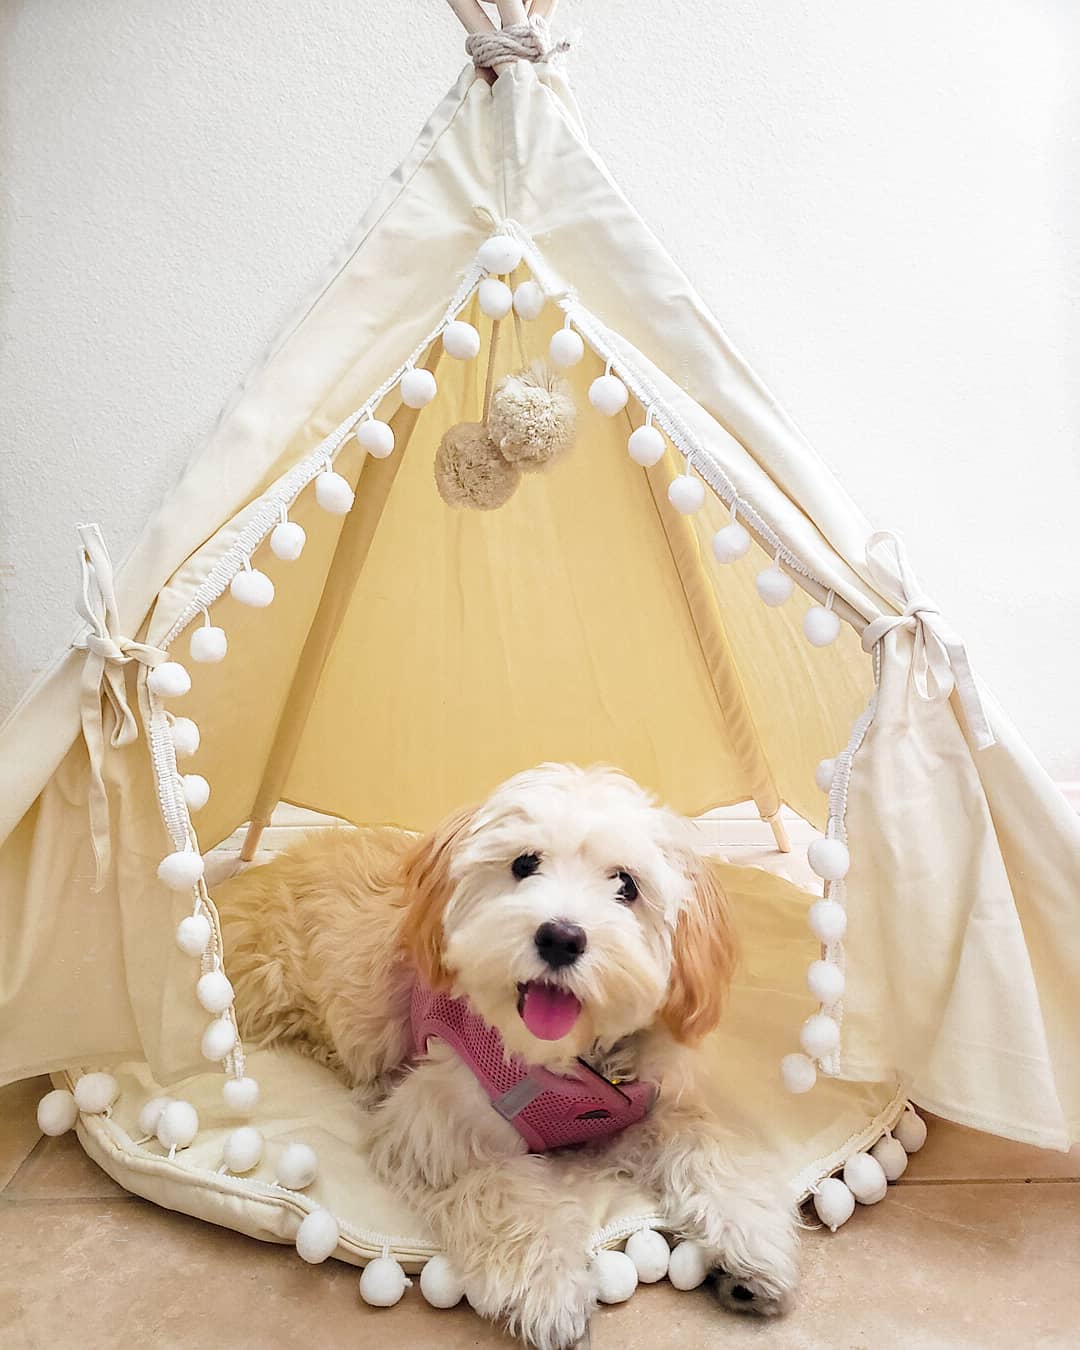 Dog Laying Underneath Indoor Tent. Photo by Instagram user @kimchipoops